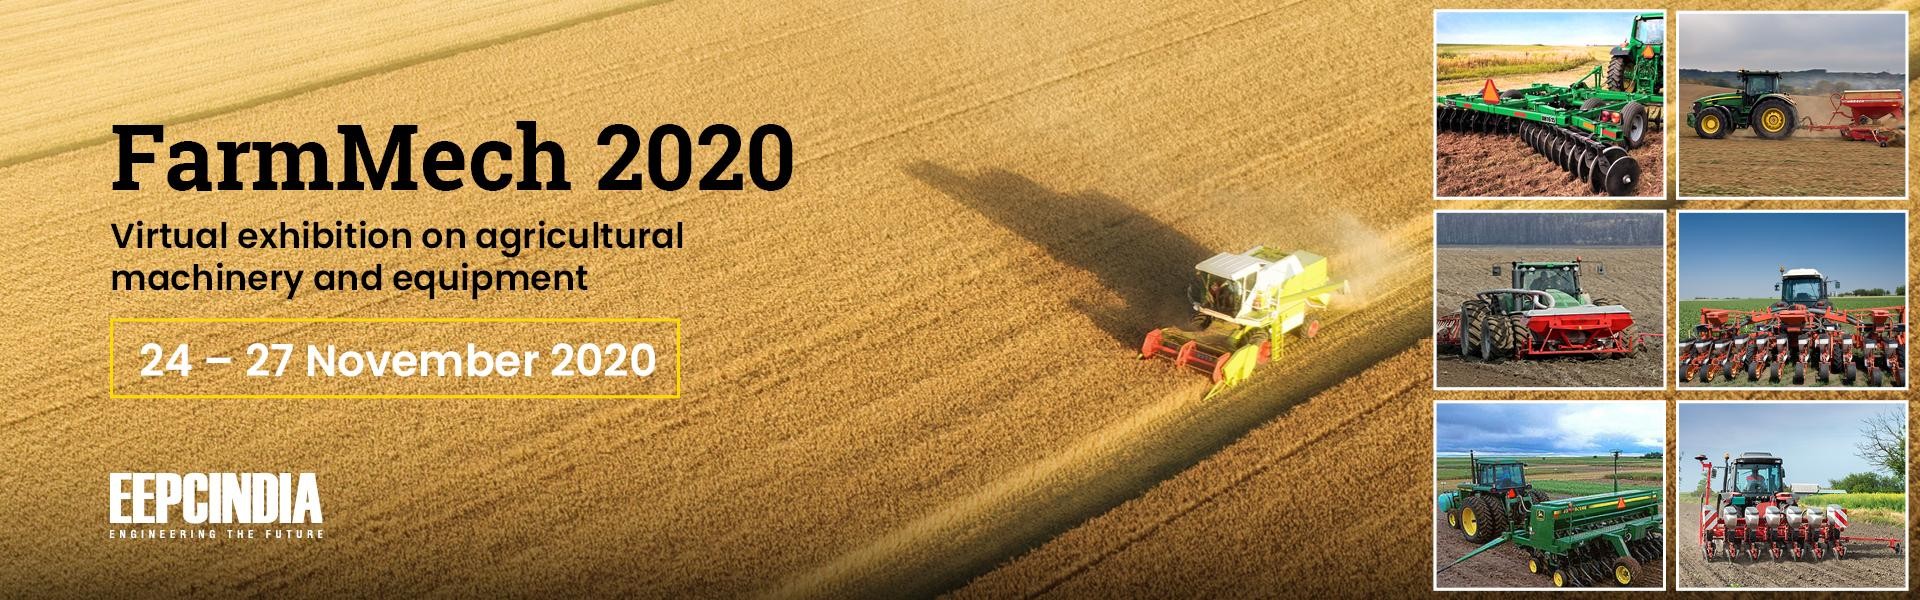 Virtual exhibition on agricultural machinery and equipment - FarmMech 2020, 24.11.-27.11.2020